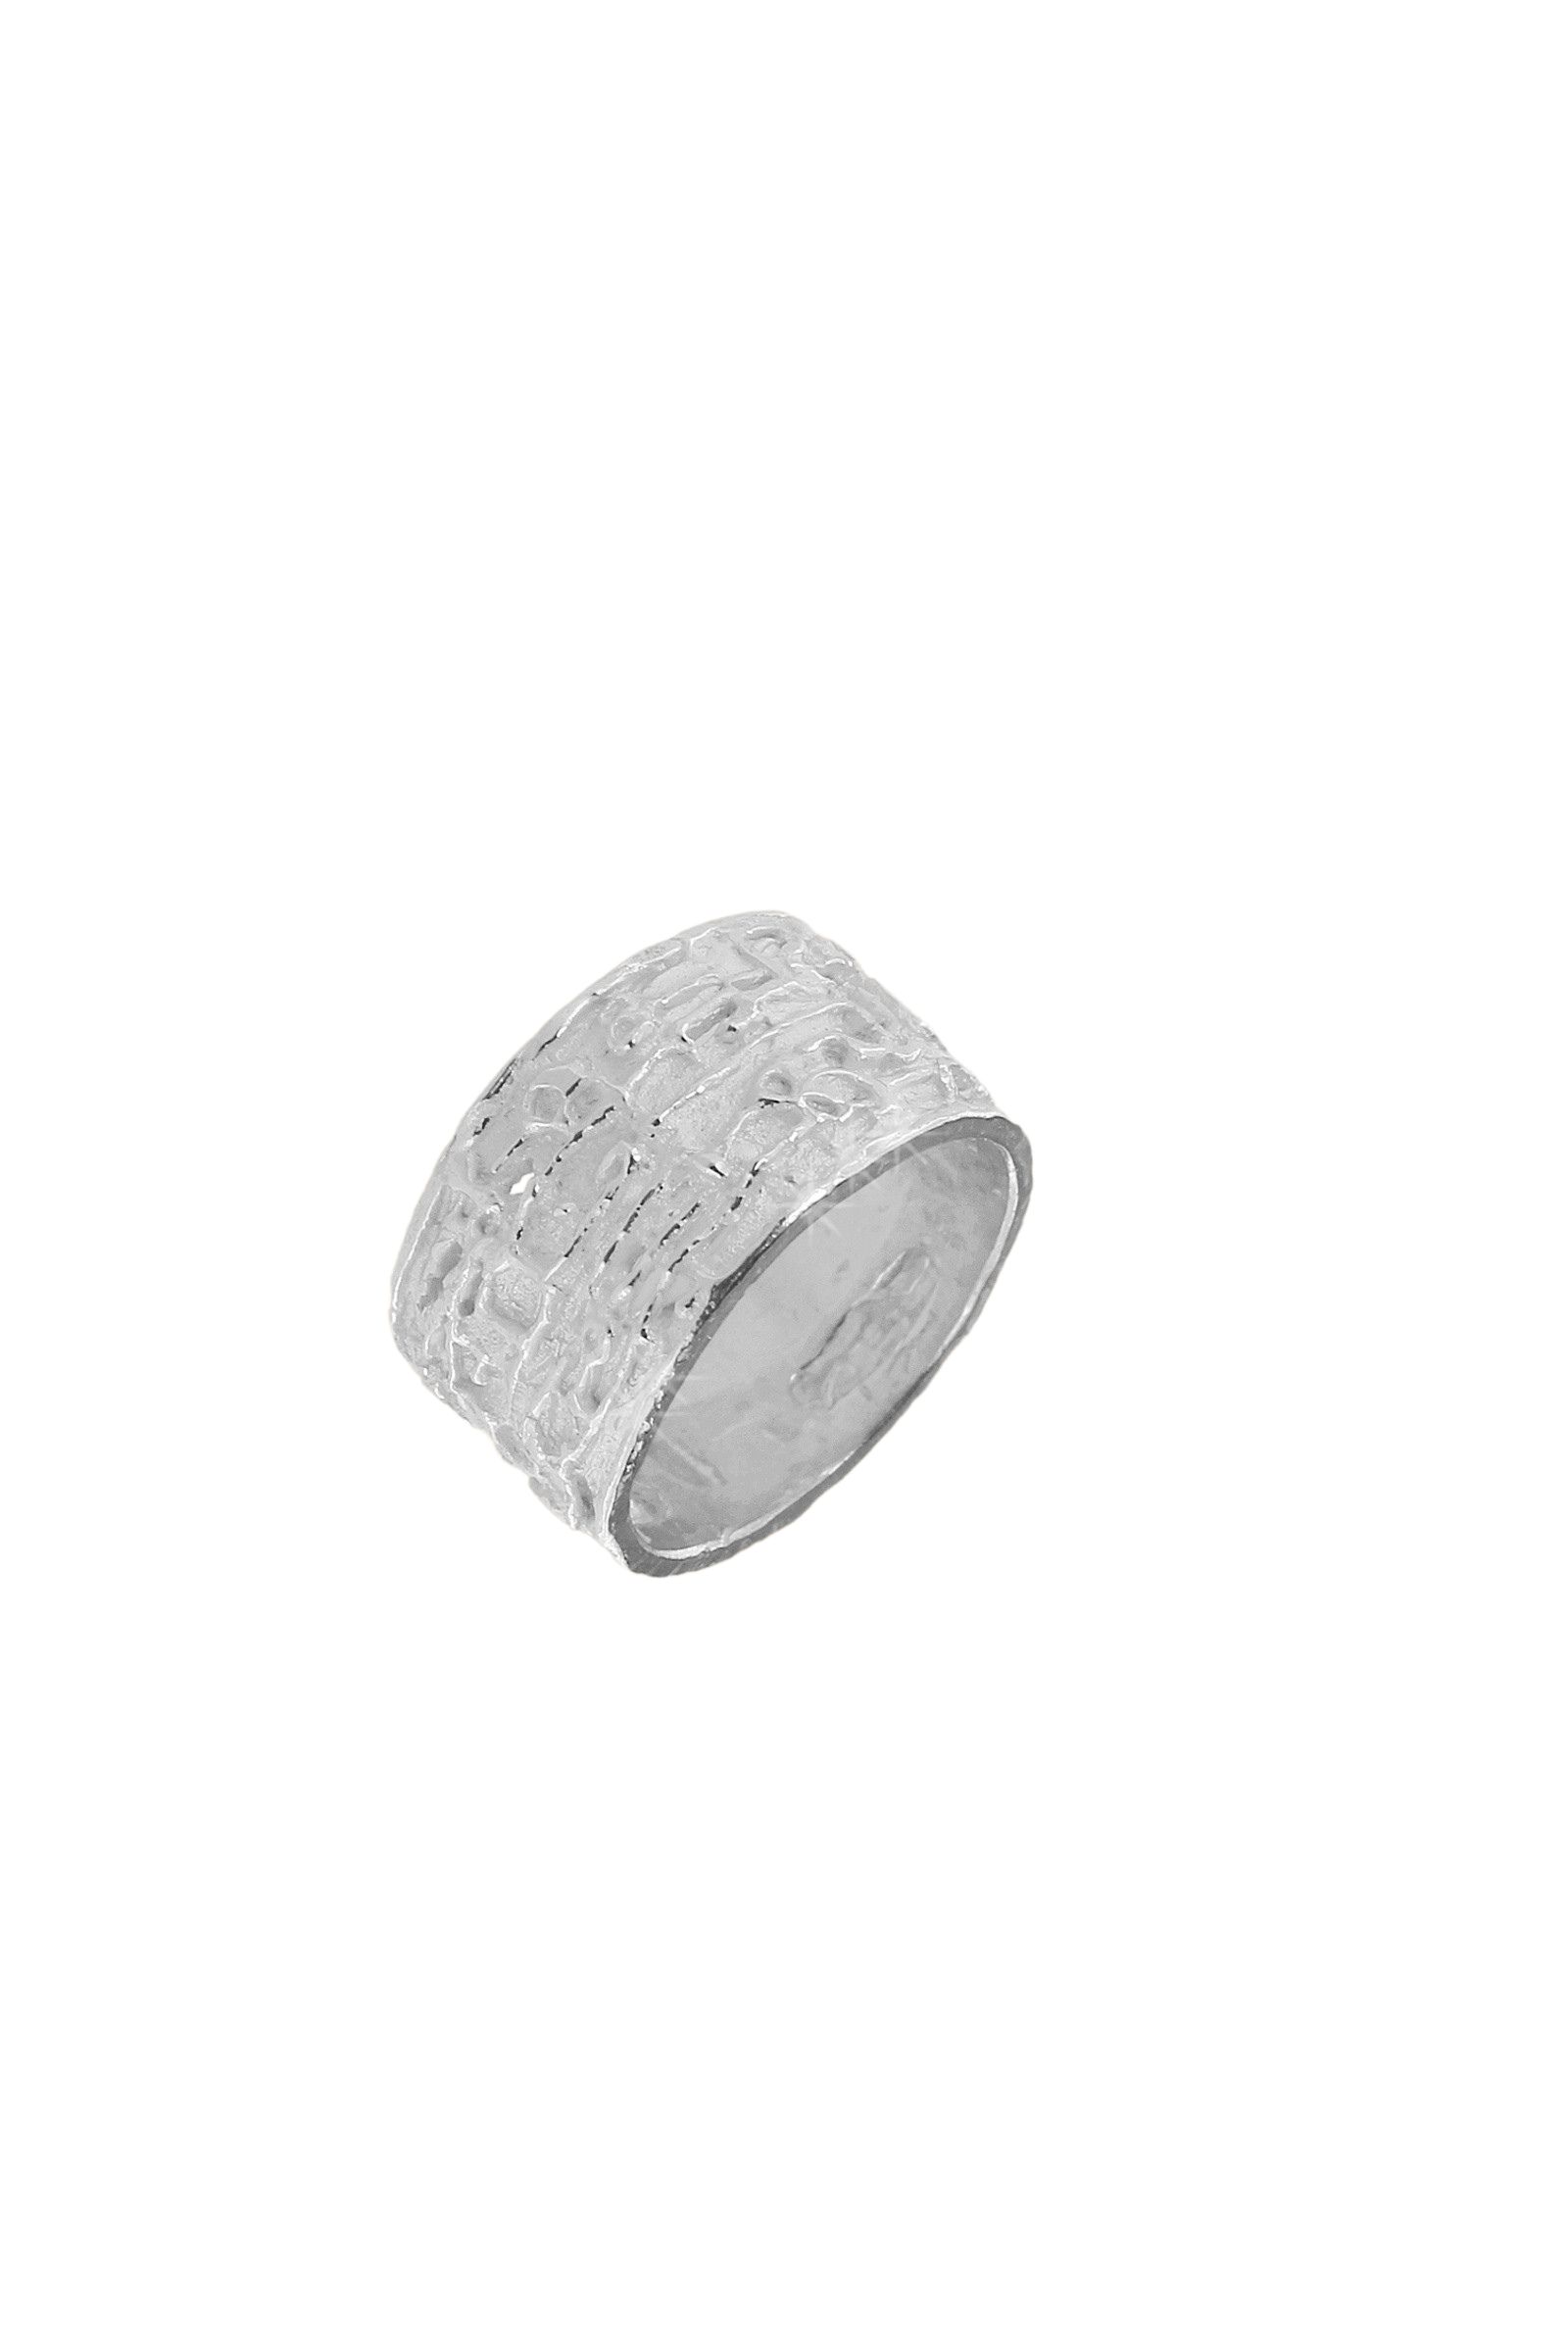 AE234-Sterling-Silver-925-Band-Ring-1_